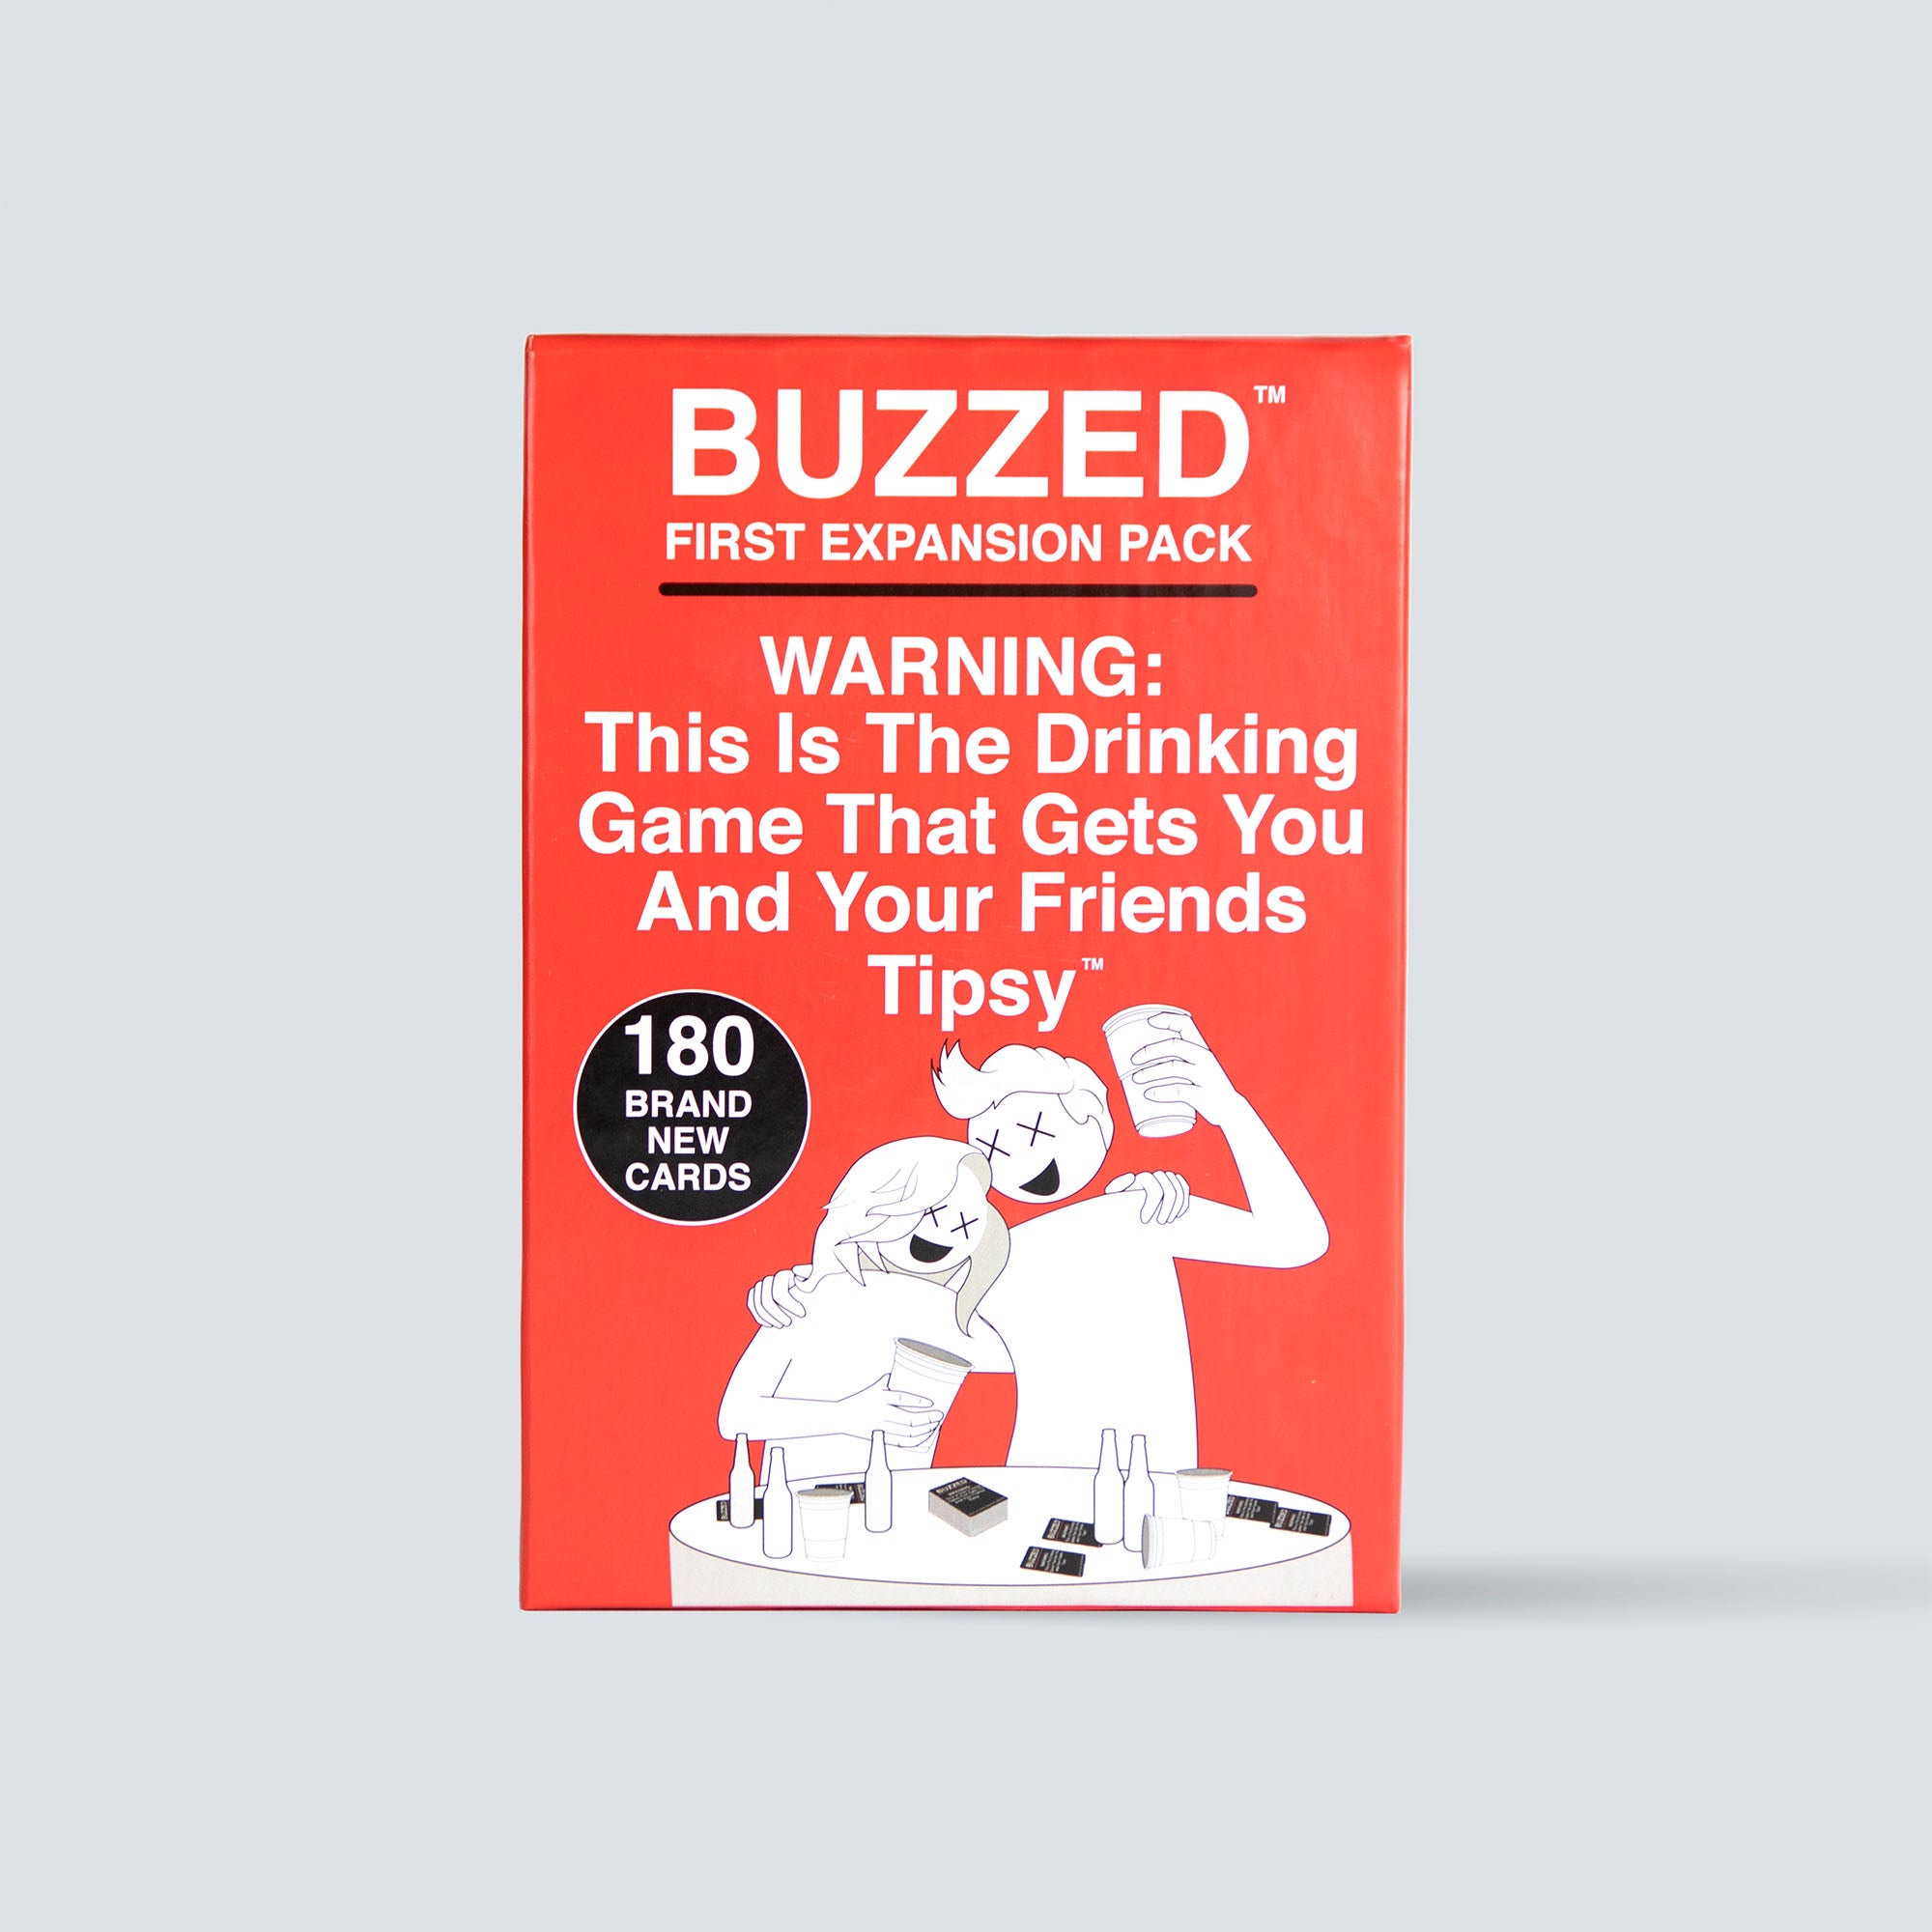 buzzed-expansion-pack-1-game-box-and-game-play-03-what-do-you-meme-by-relatable